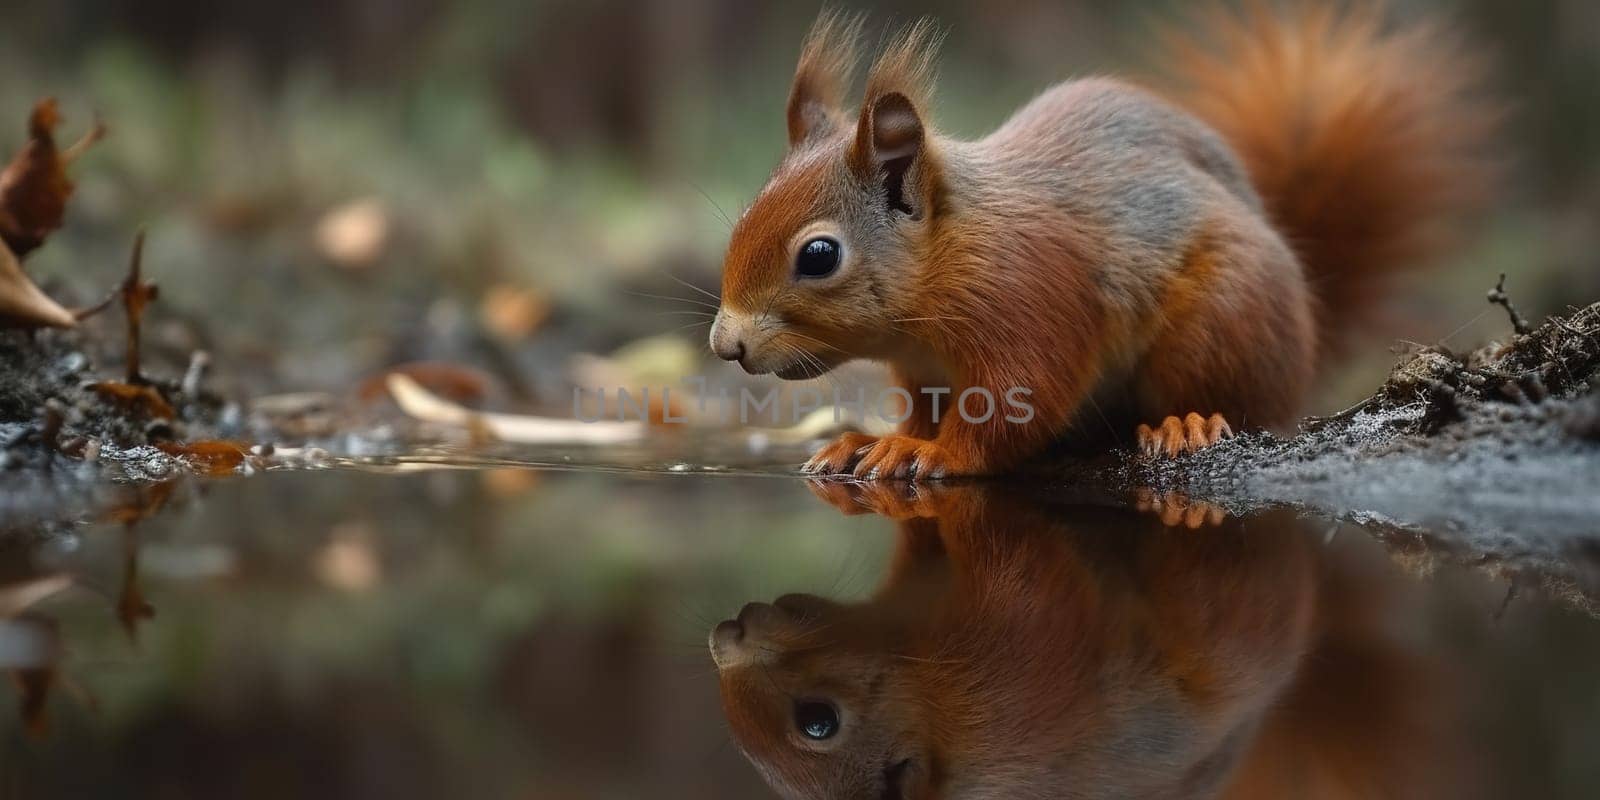 Cute Young Squirrel Over Puddle Of Water In Autumn Forest by tan4ikk1